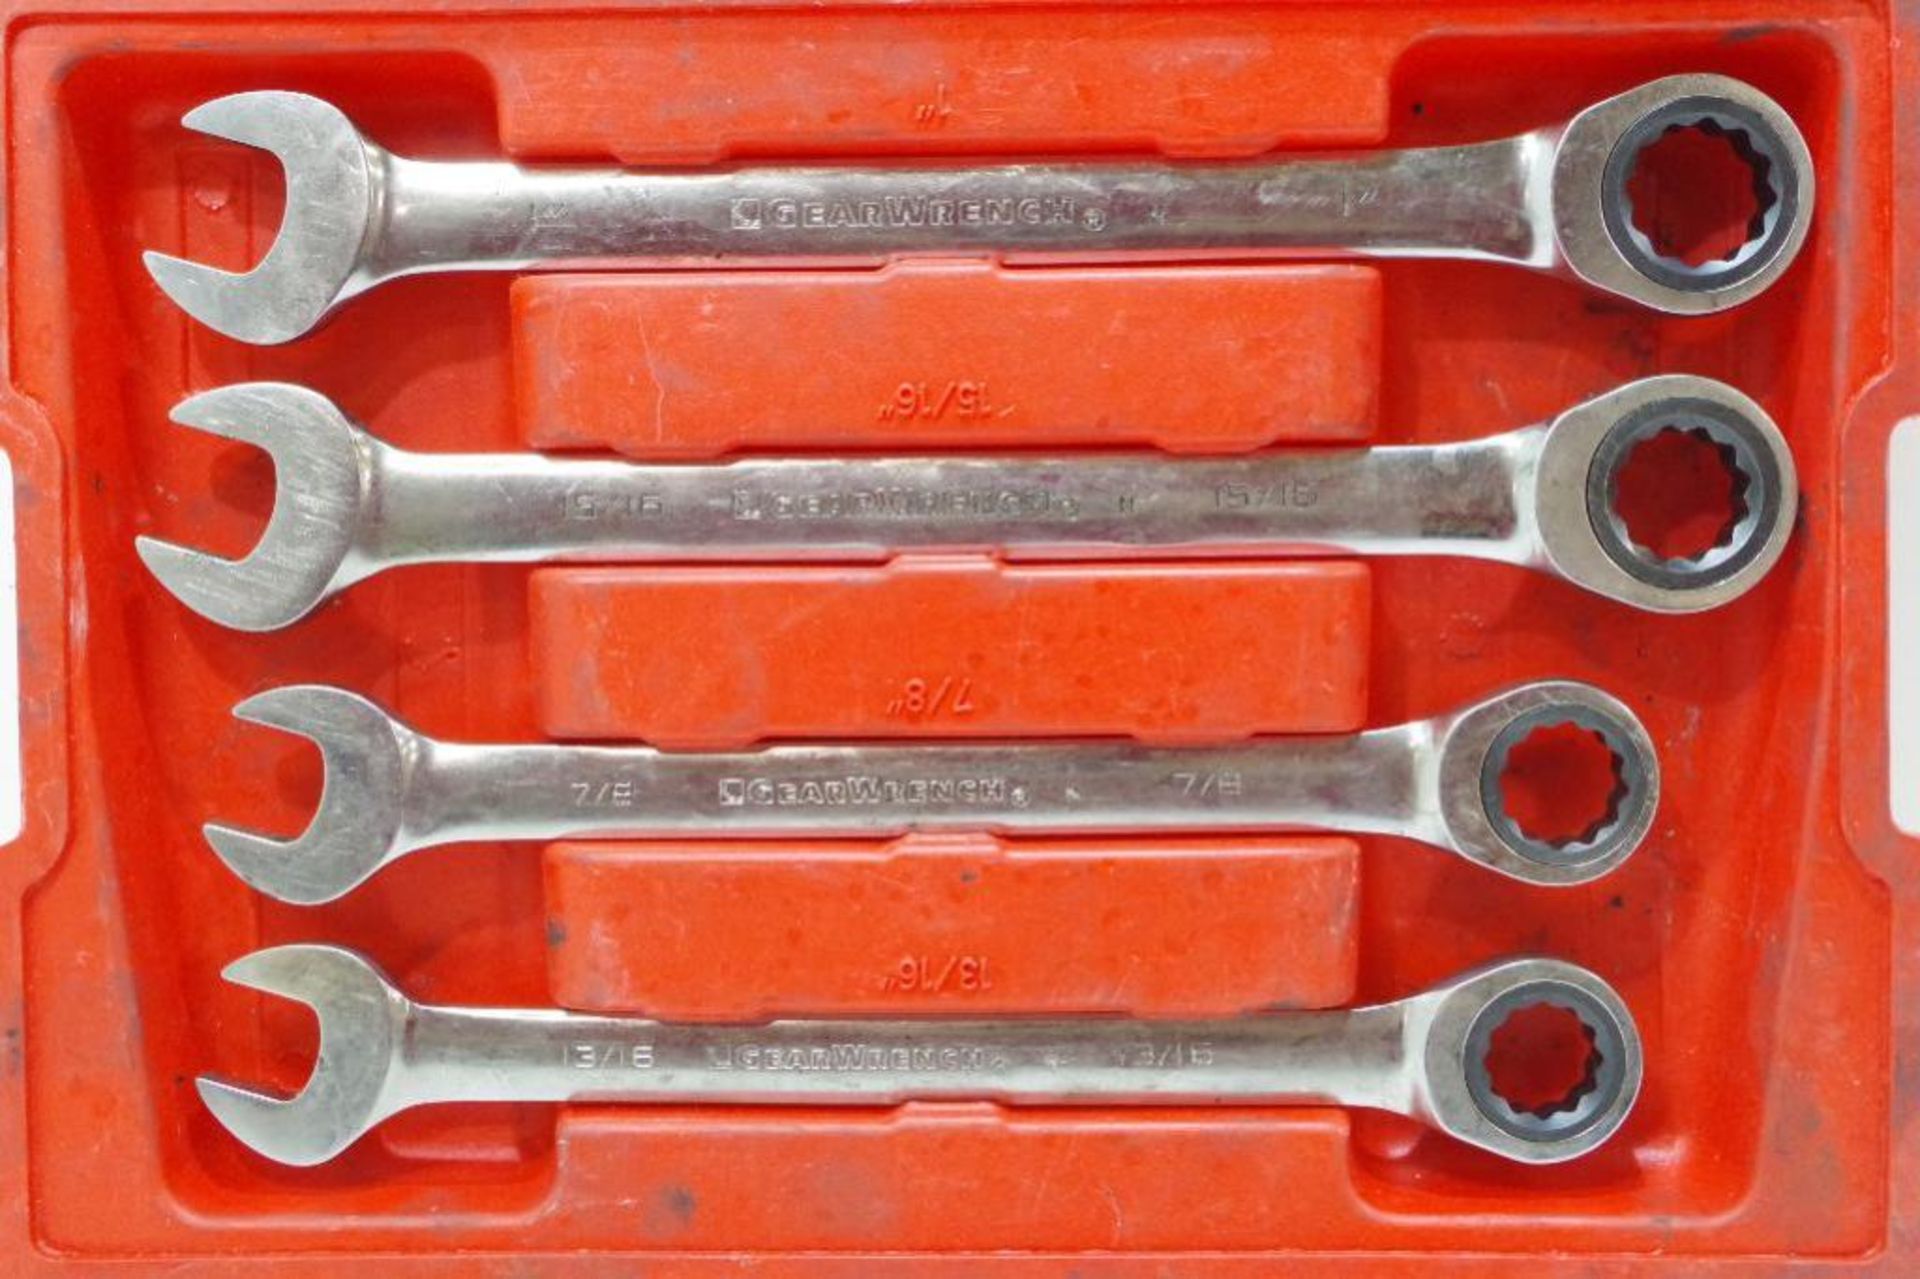 GEARWRENCH Ratcheting Wrench Set: 13/16", 7/8", 15/16" & 1"